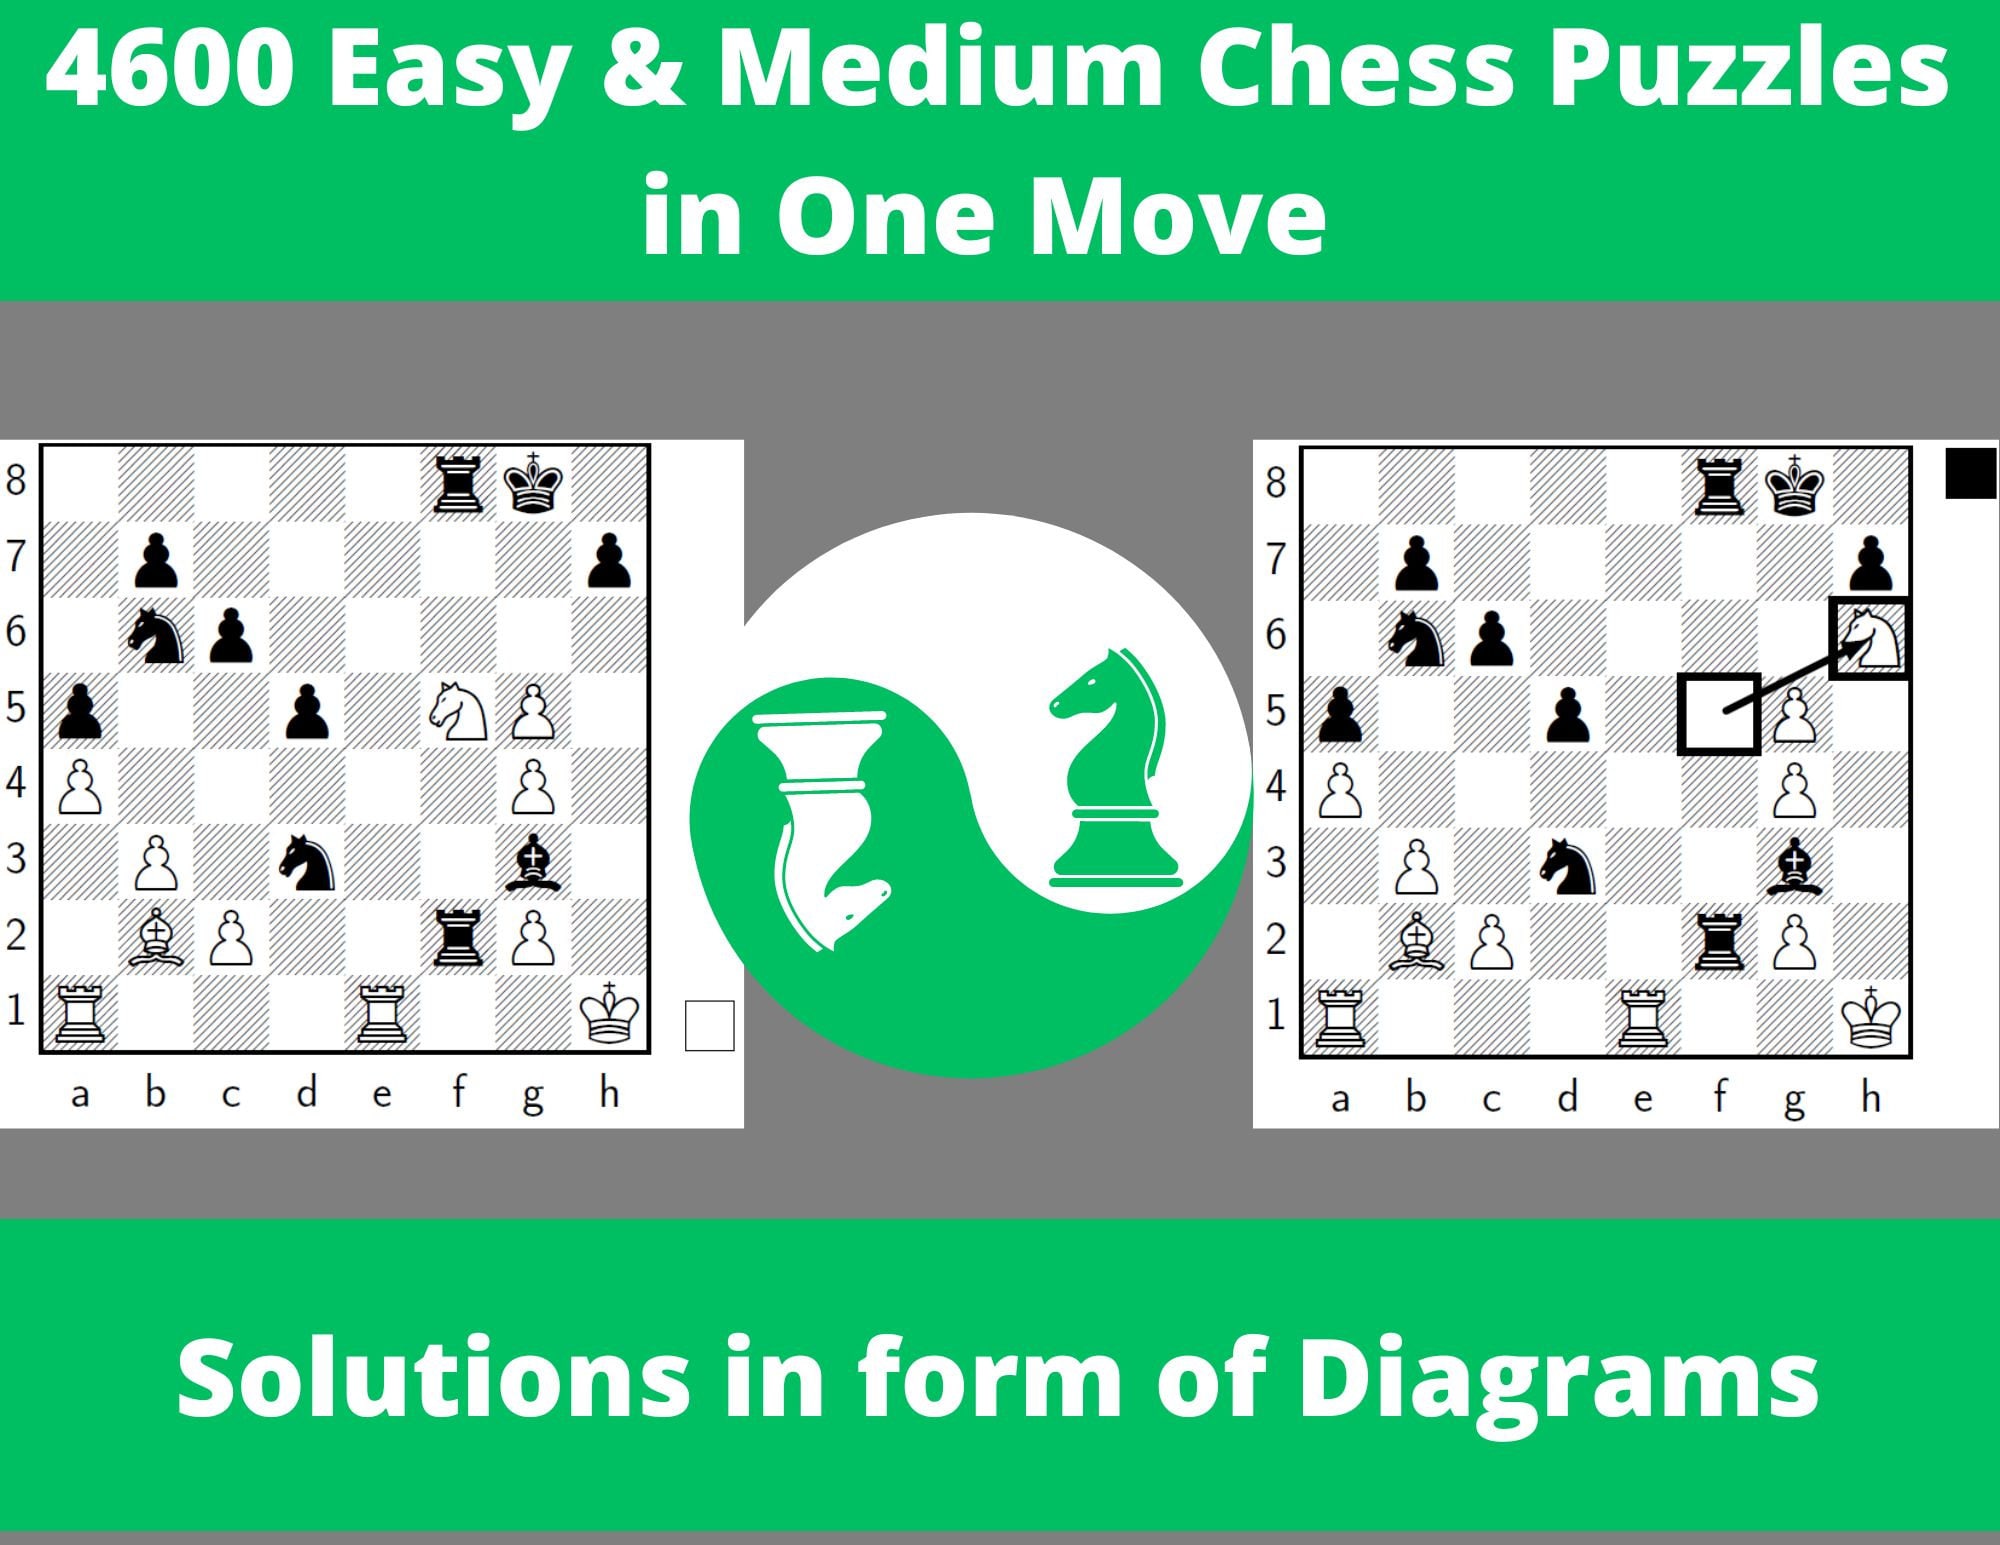 4600 Easy & Medium Chess Puzzles in One Move - Printable PDF with Answers -  Instant Download - Chess Gift - Chess for Kids - Chess Problems